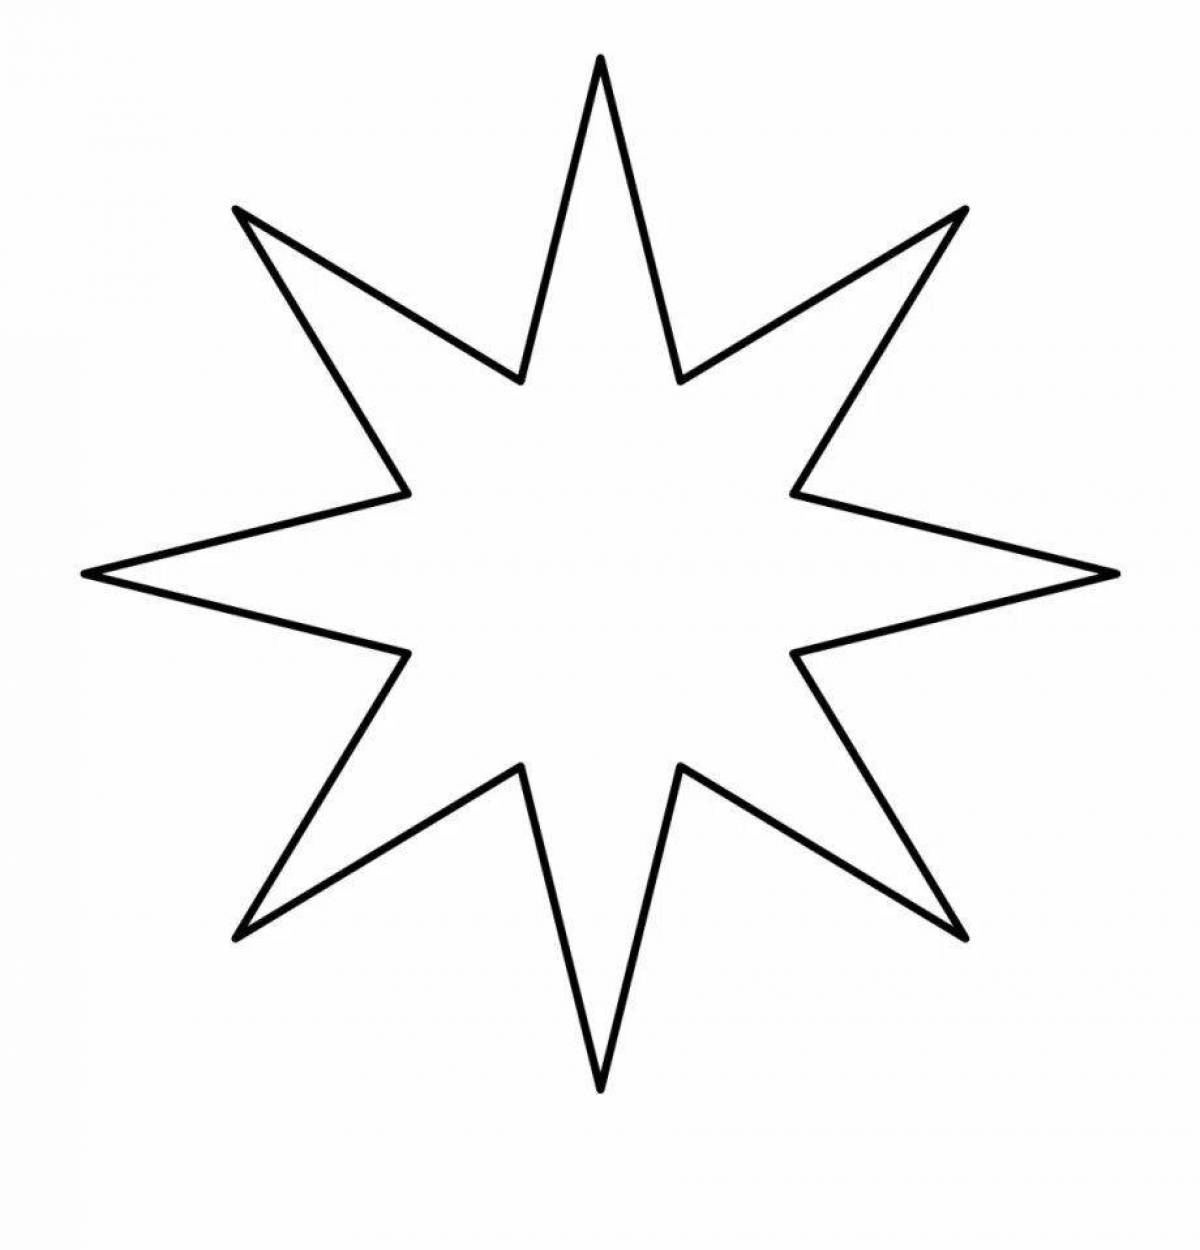 Adorable six-pointed star coloring page